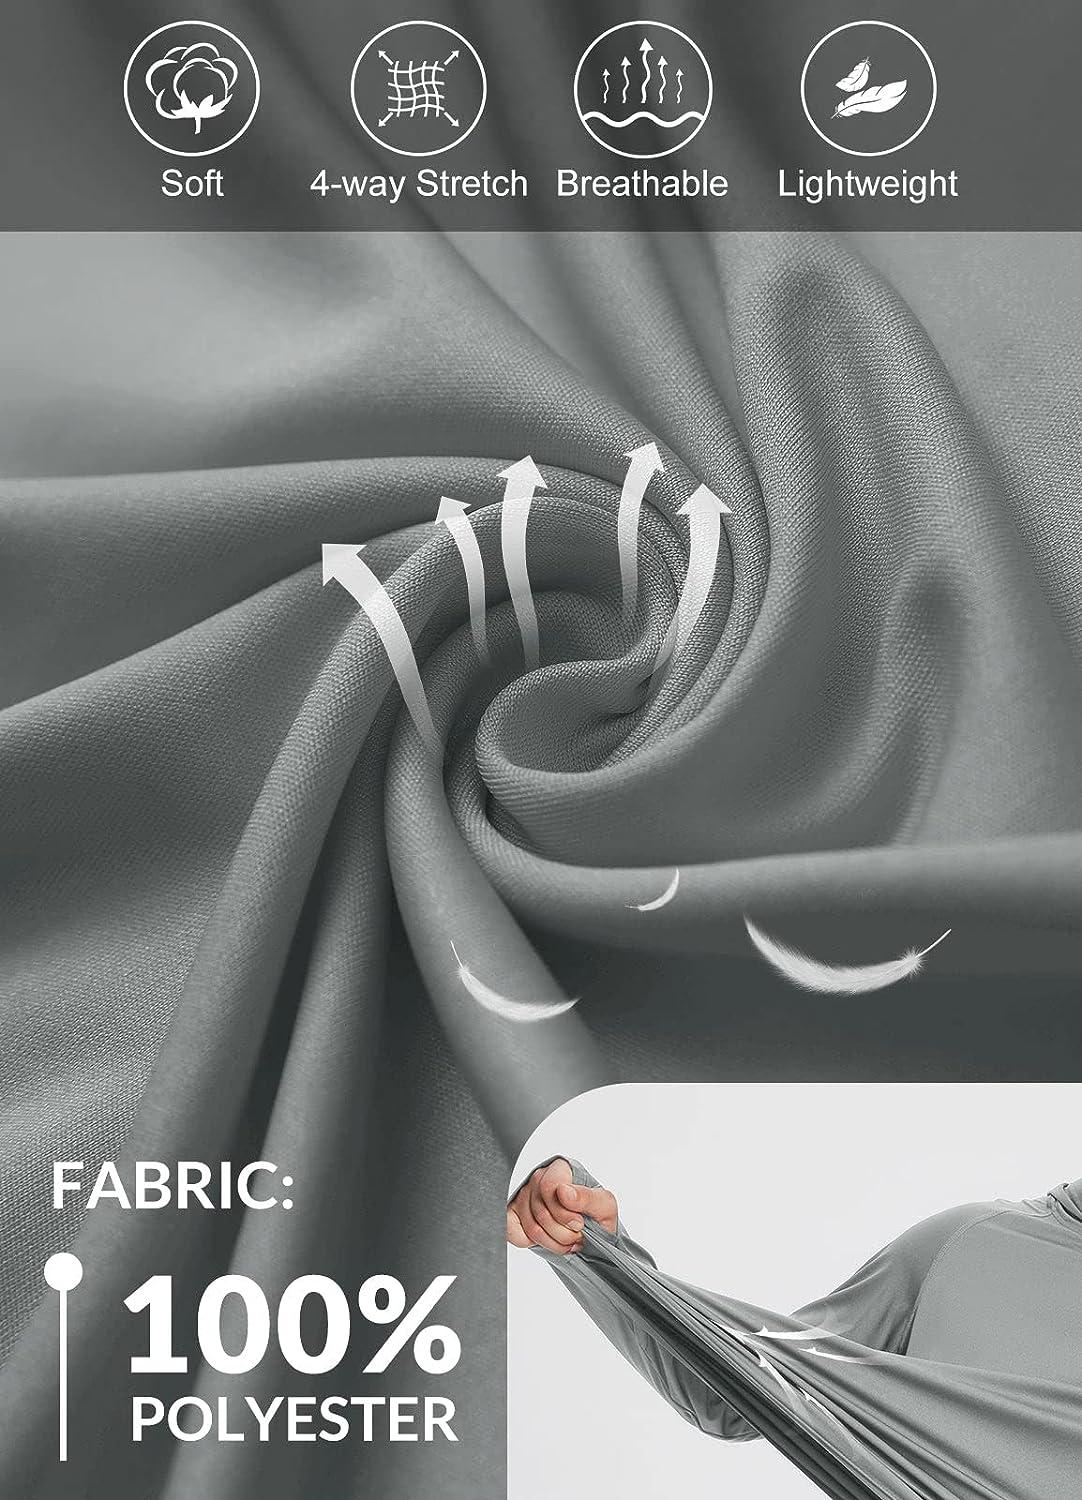 High Quality Upf 50 Fabric in Polyester Spandex for Sun Protection